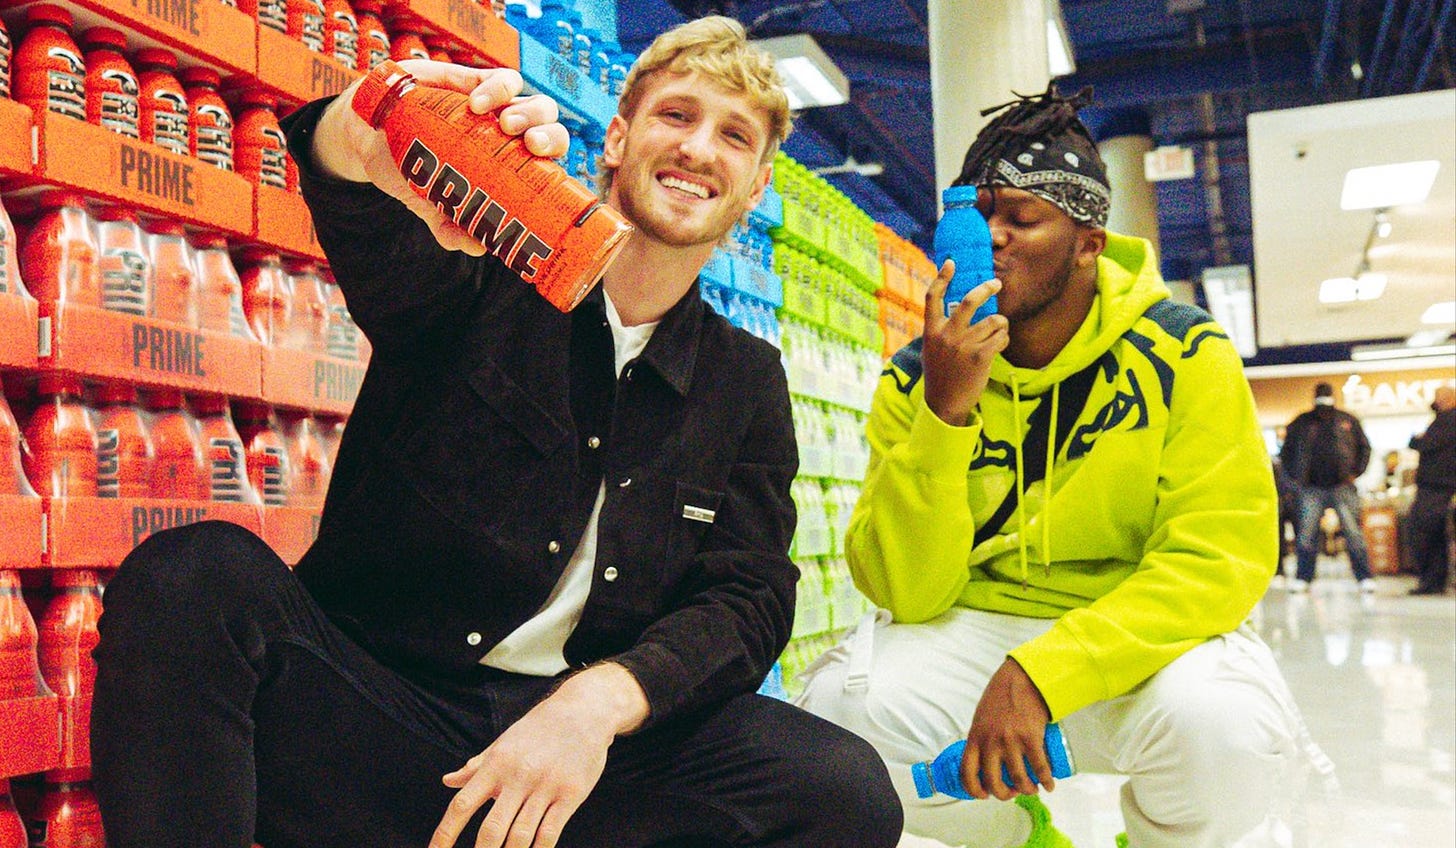 From Punches to Prime: KSI and Logan Paul Have a Drink - Boardroom